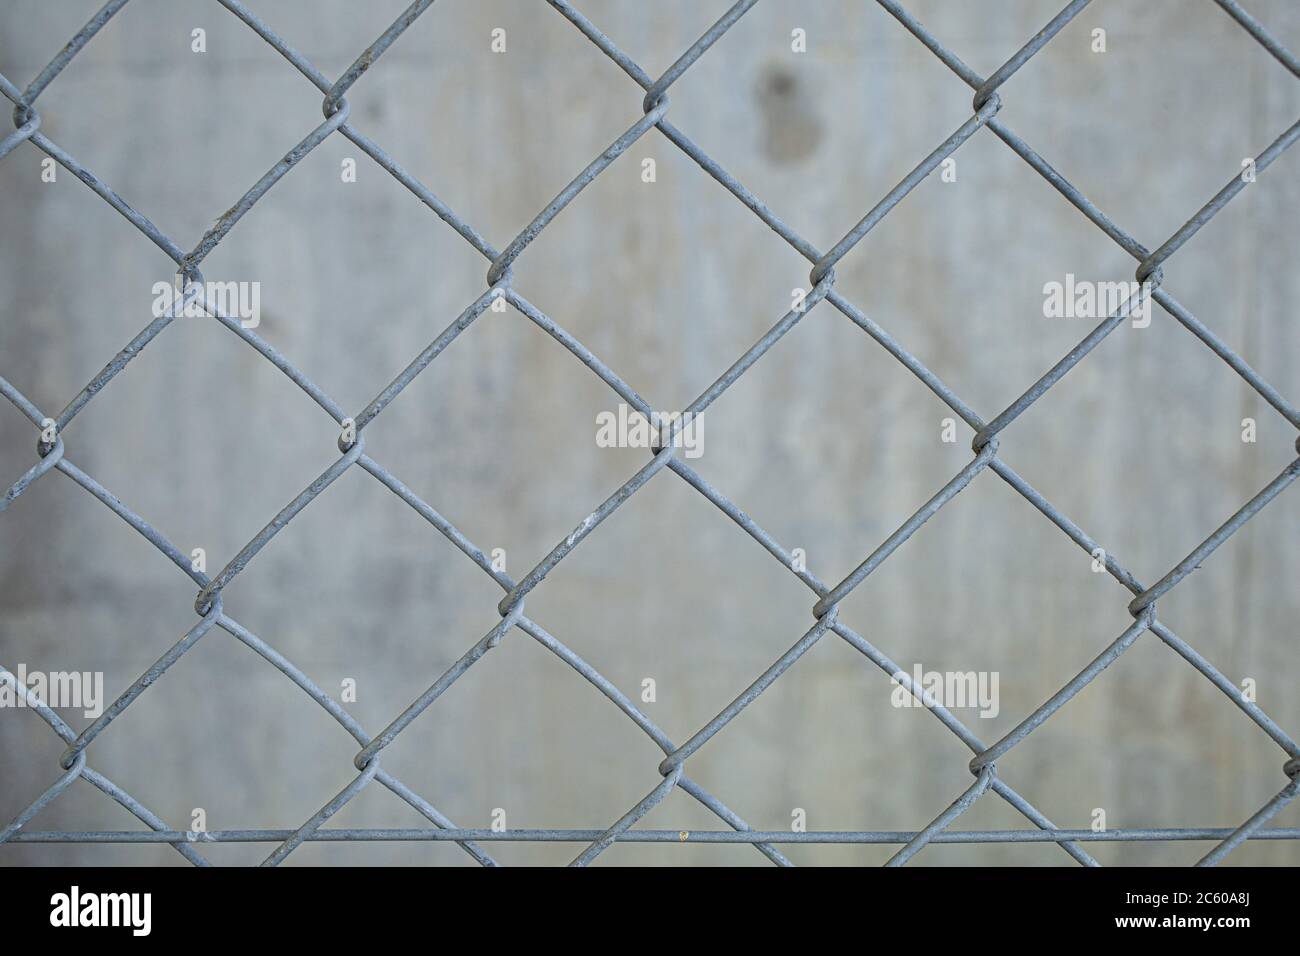 An old wire mesh with a diamond pattern. Stock Photo